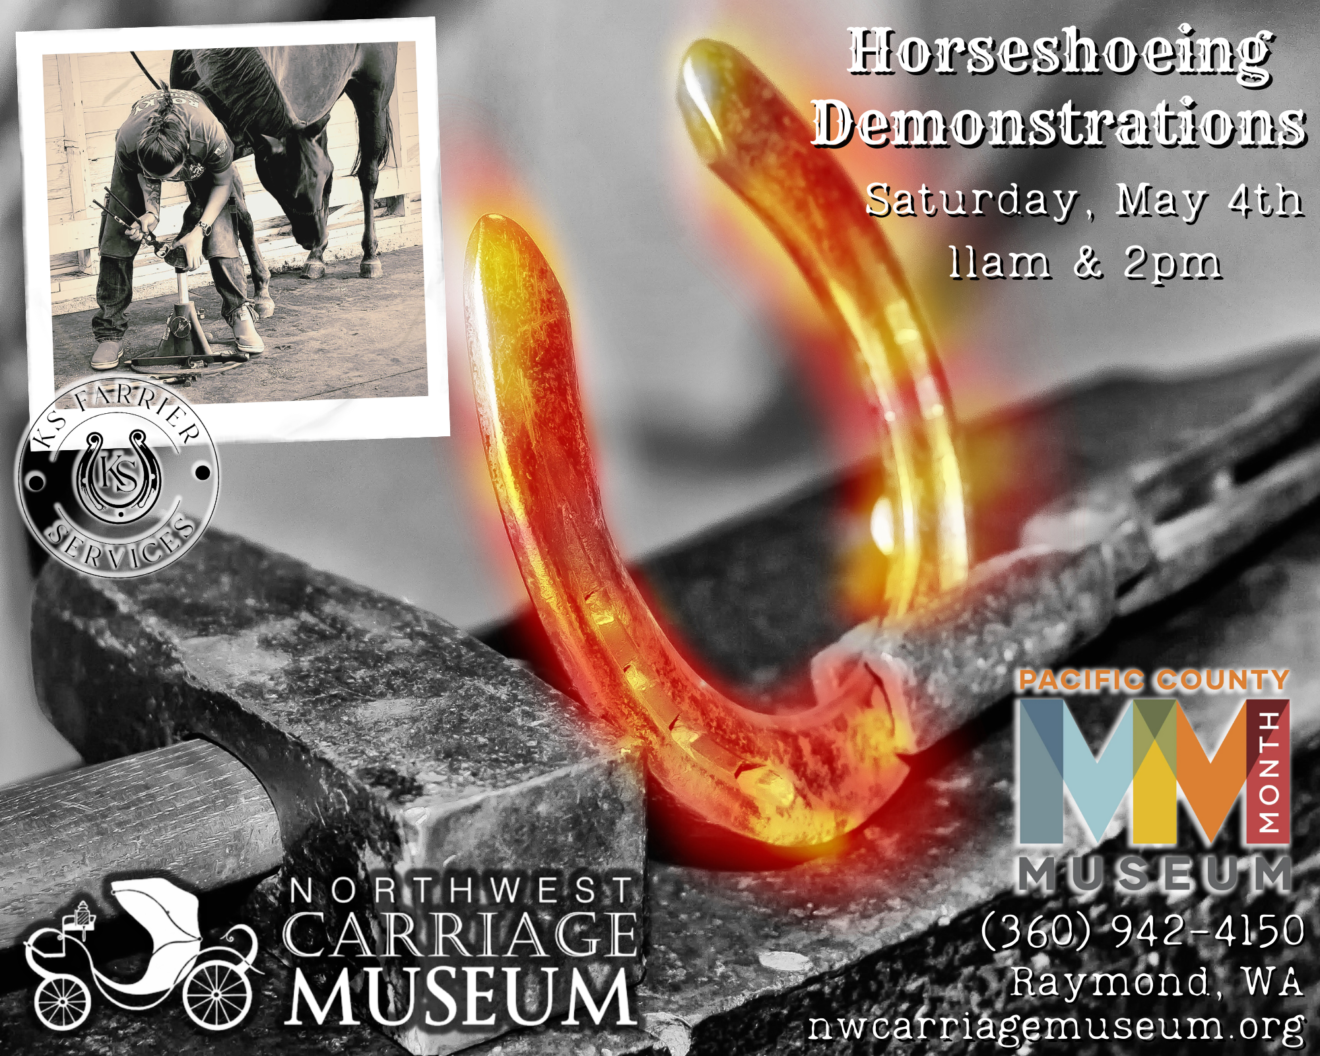 Northwest Carriage Museum Horseshoeing Demonstration Special Event